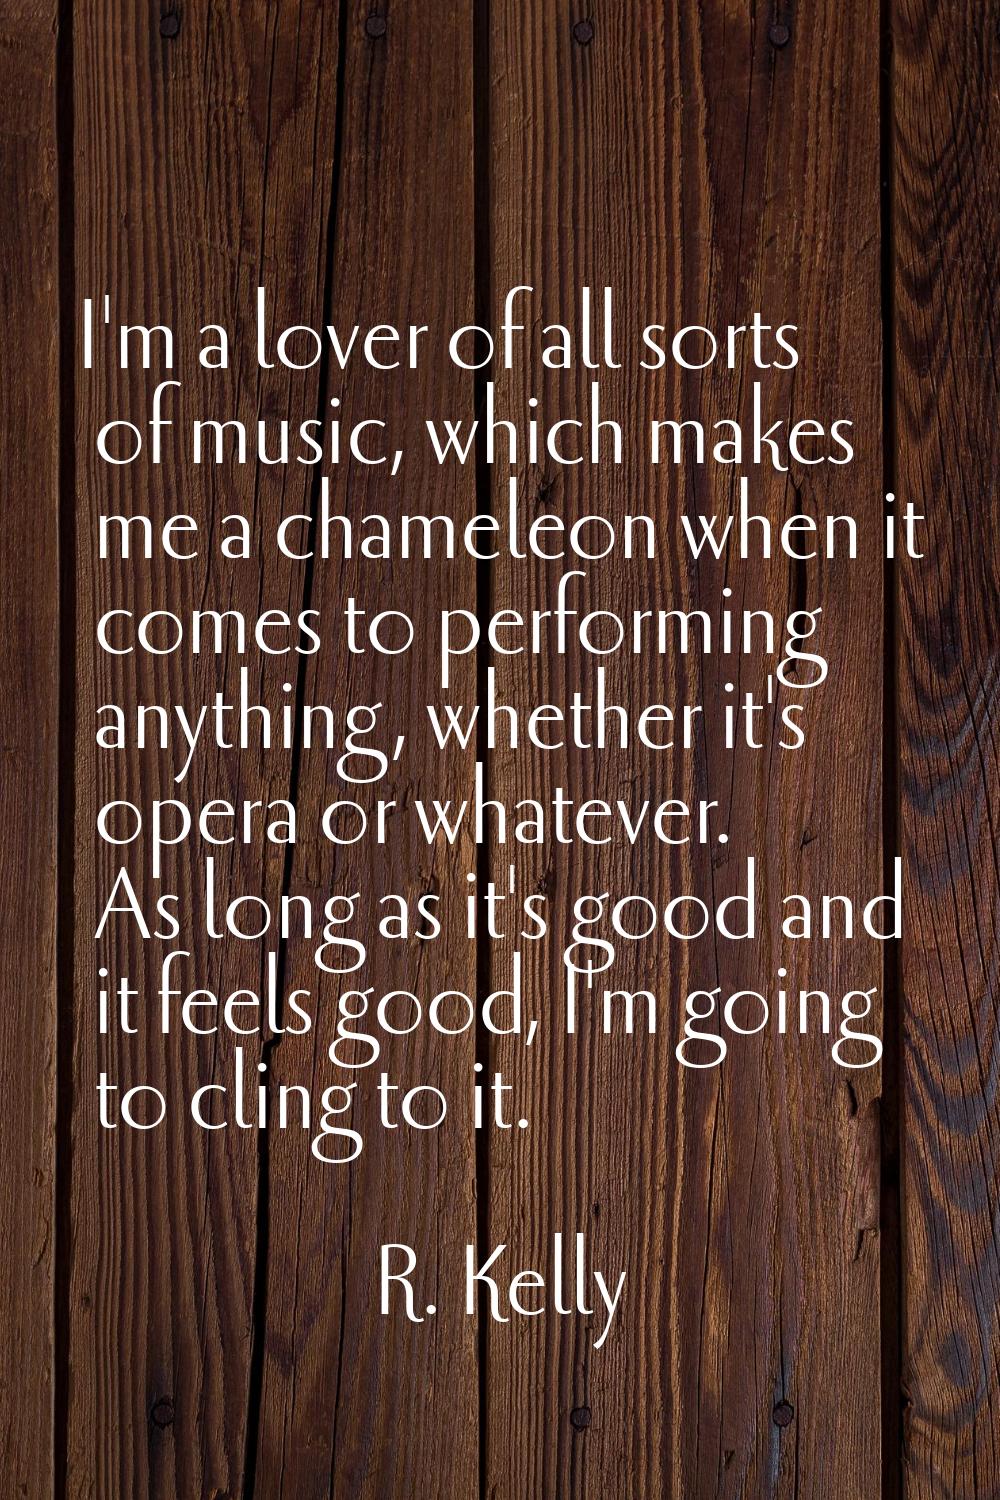 I'm a lover of all sorts of music, which makes me a chameleon when it comes to performing anything,